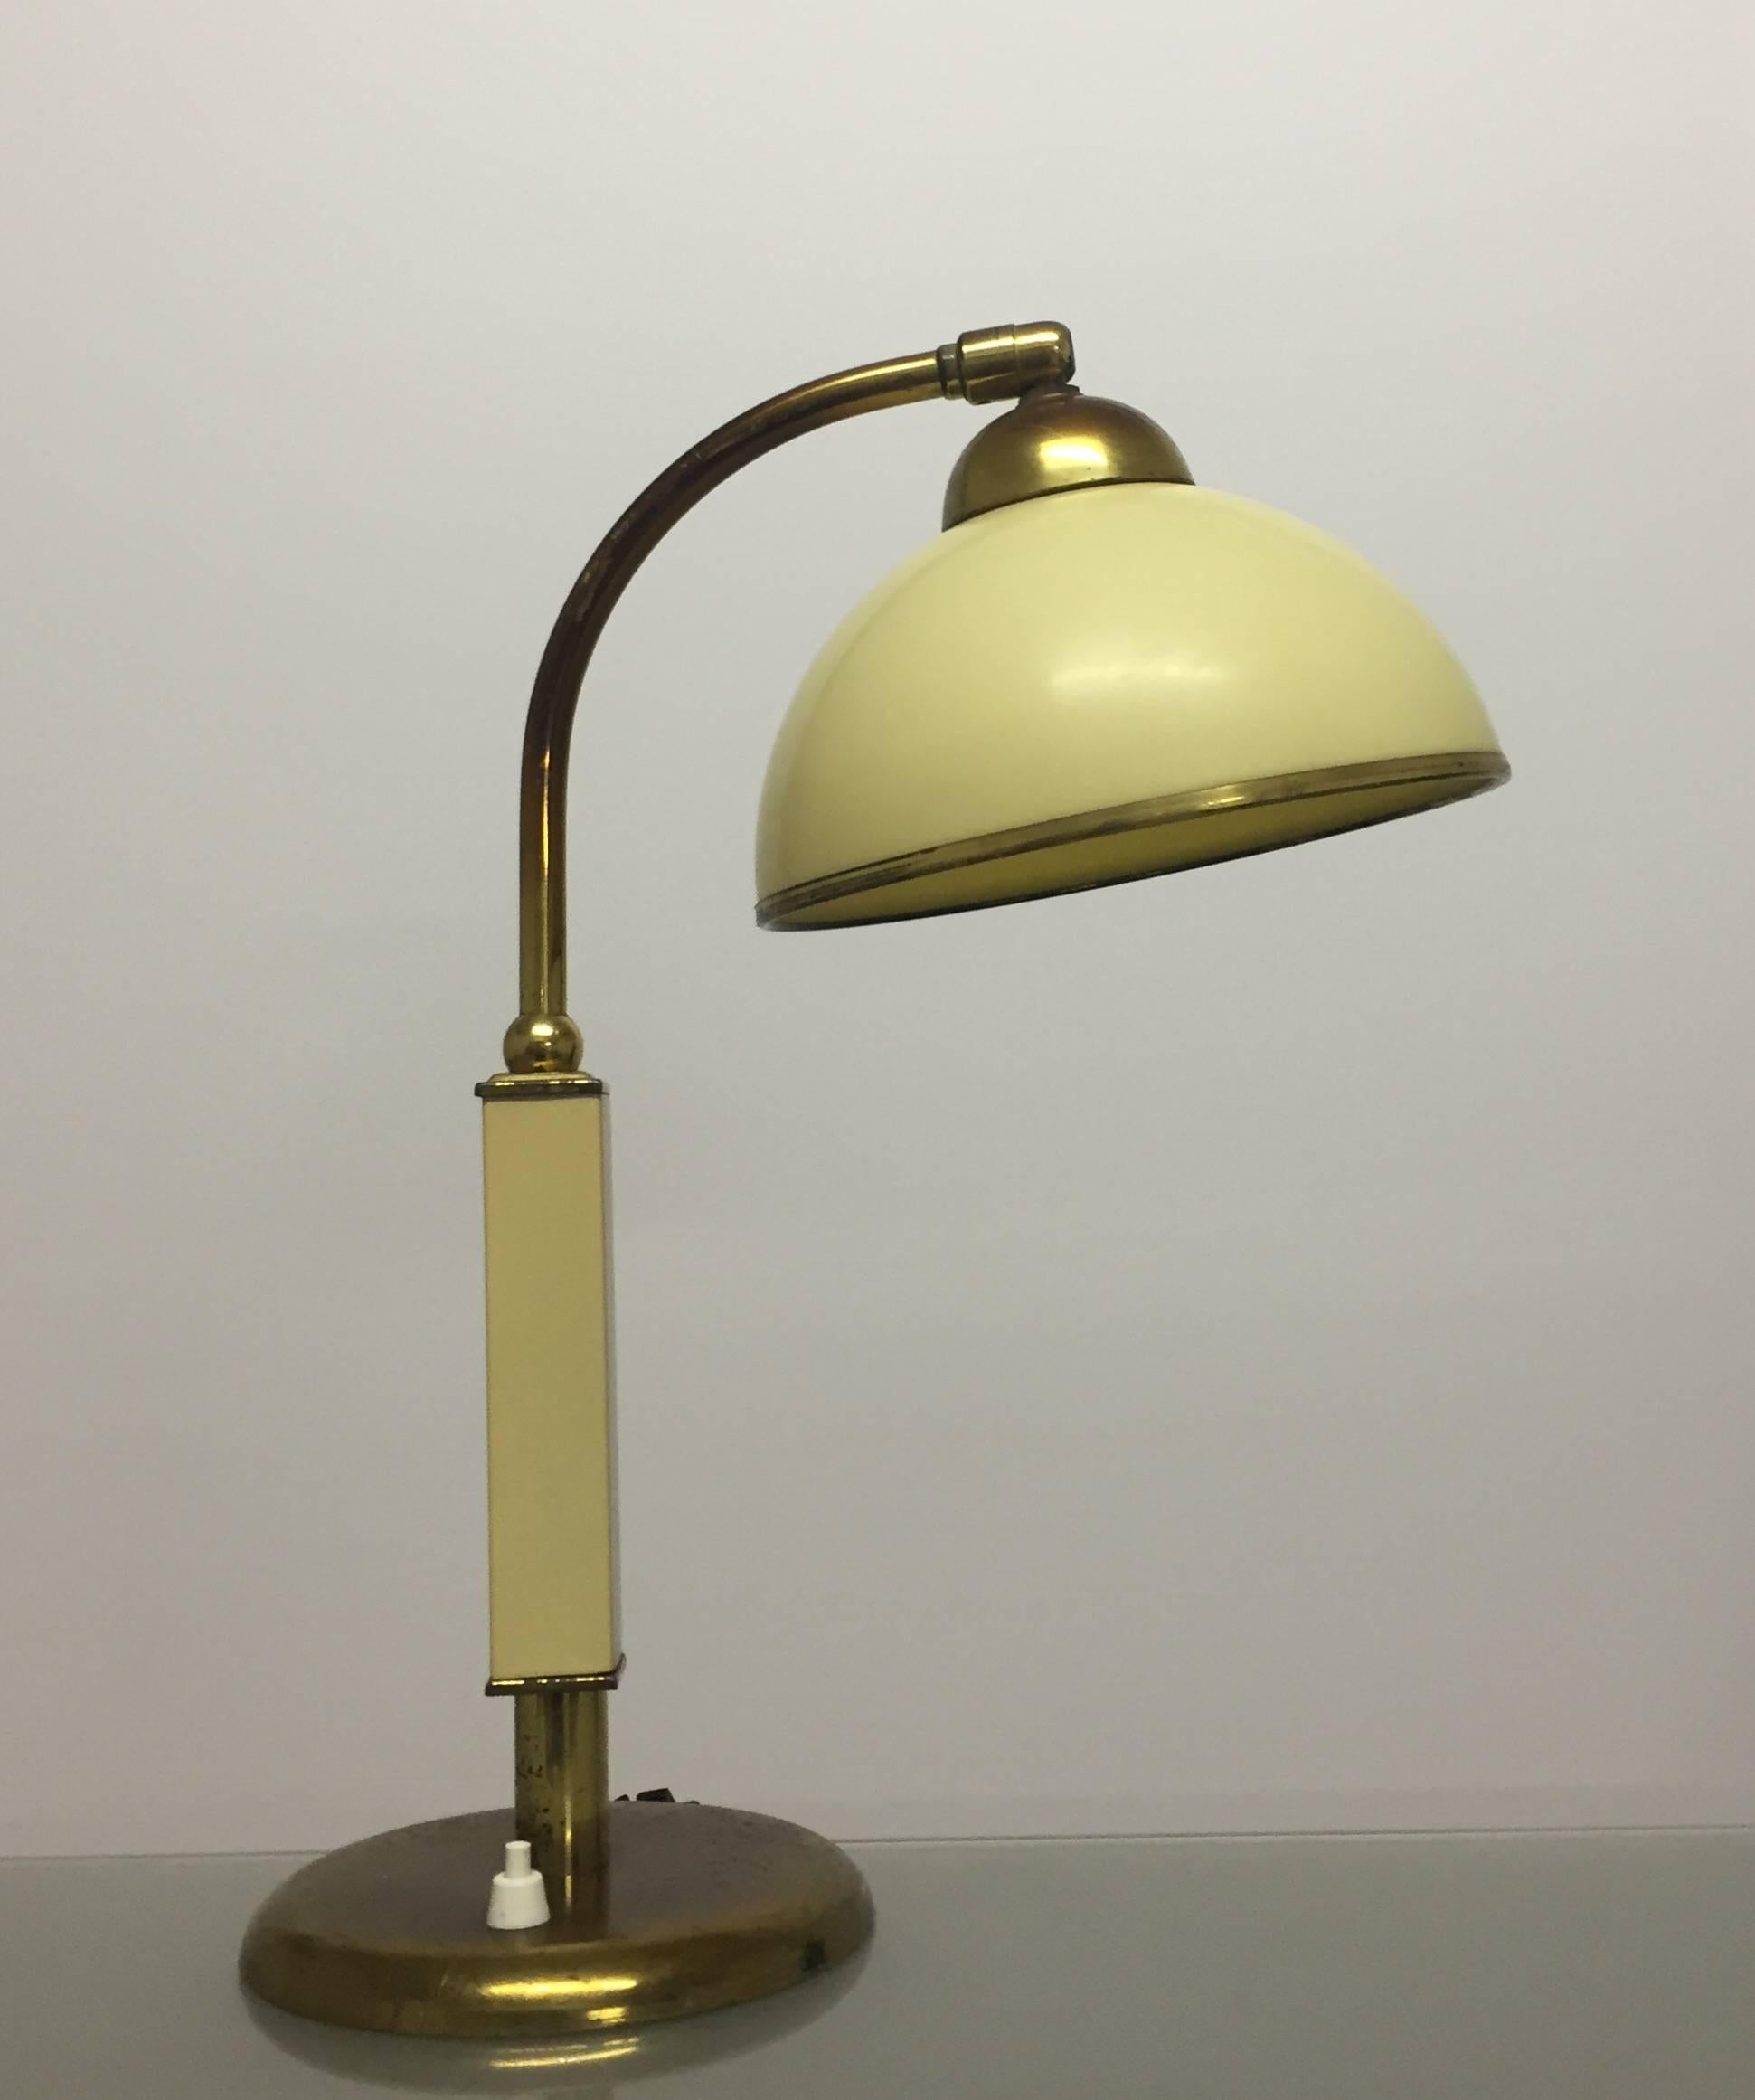 Beautiful table lamp made of brass and Bakelite, Bauhsus, Germany, circa 1930s
Socket: One x E27 for standard screw bulbs.
Very good original condition with old patination.
 